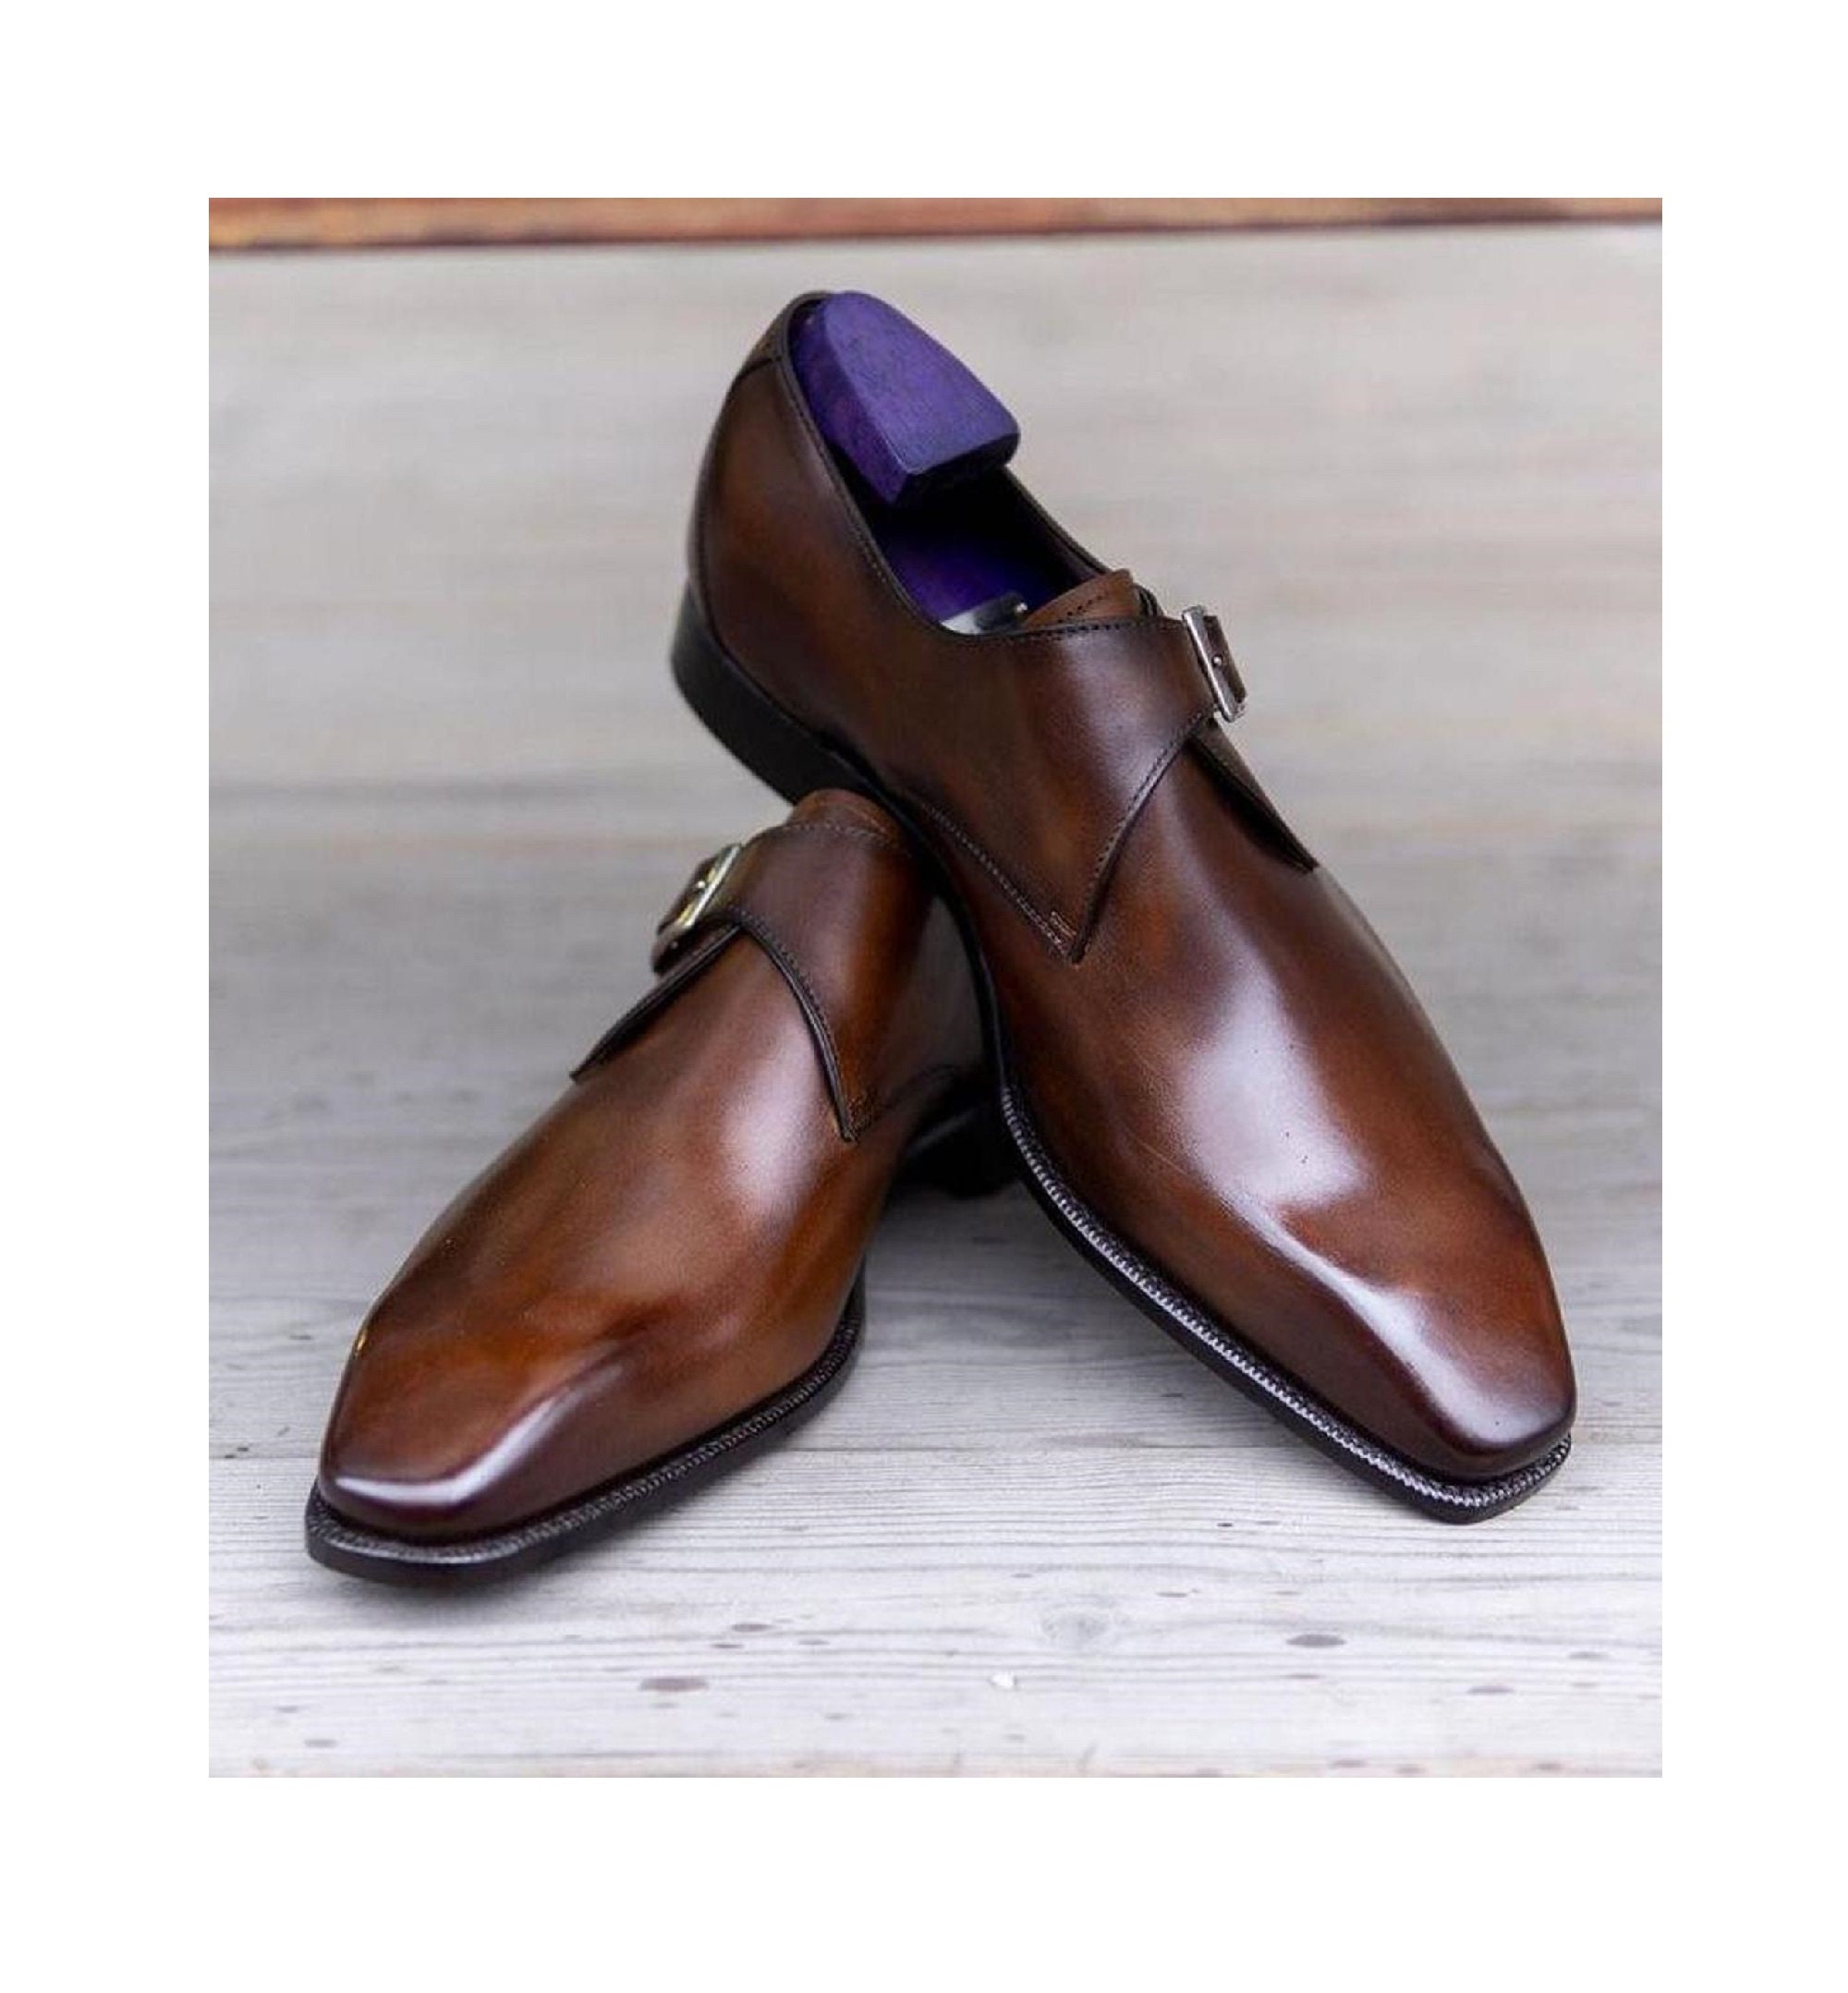 New Pure Handmade Brown Shaded Leather Stylish Monk Strap Shoes For Men's